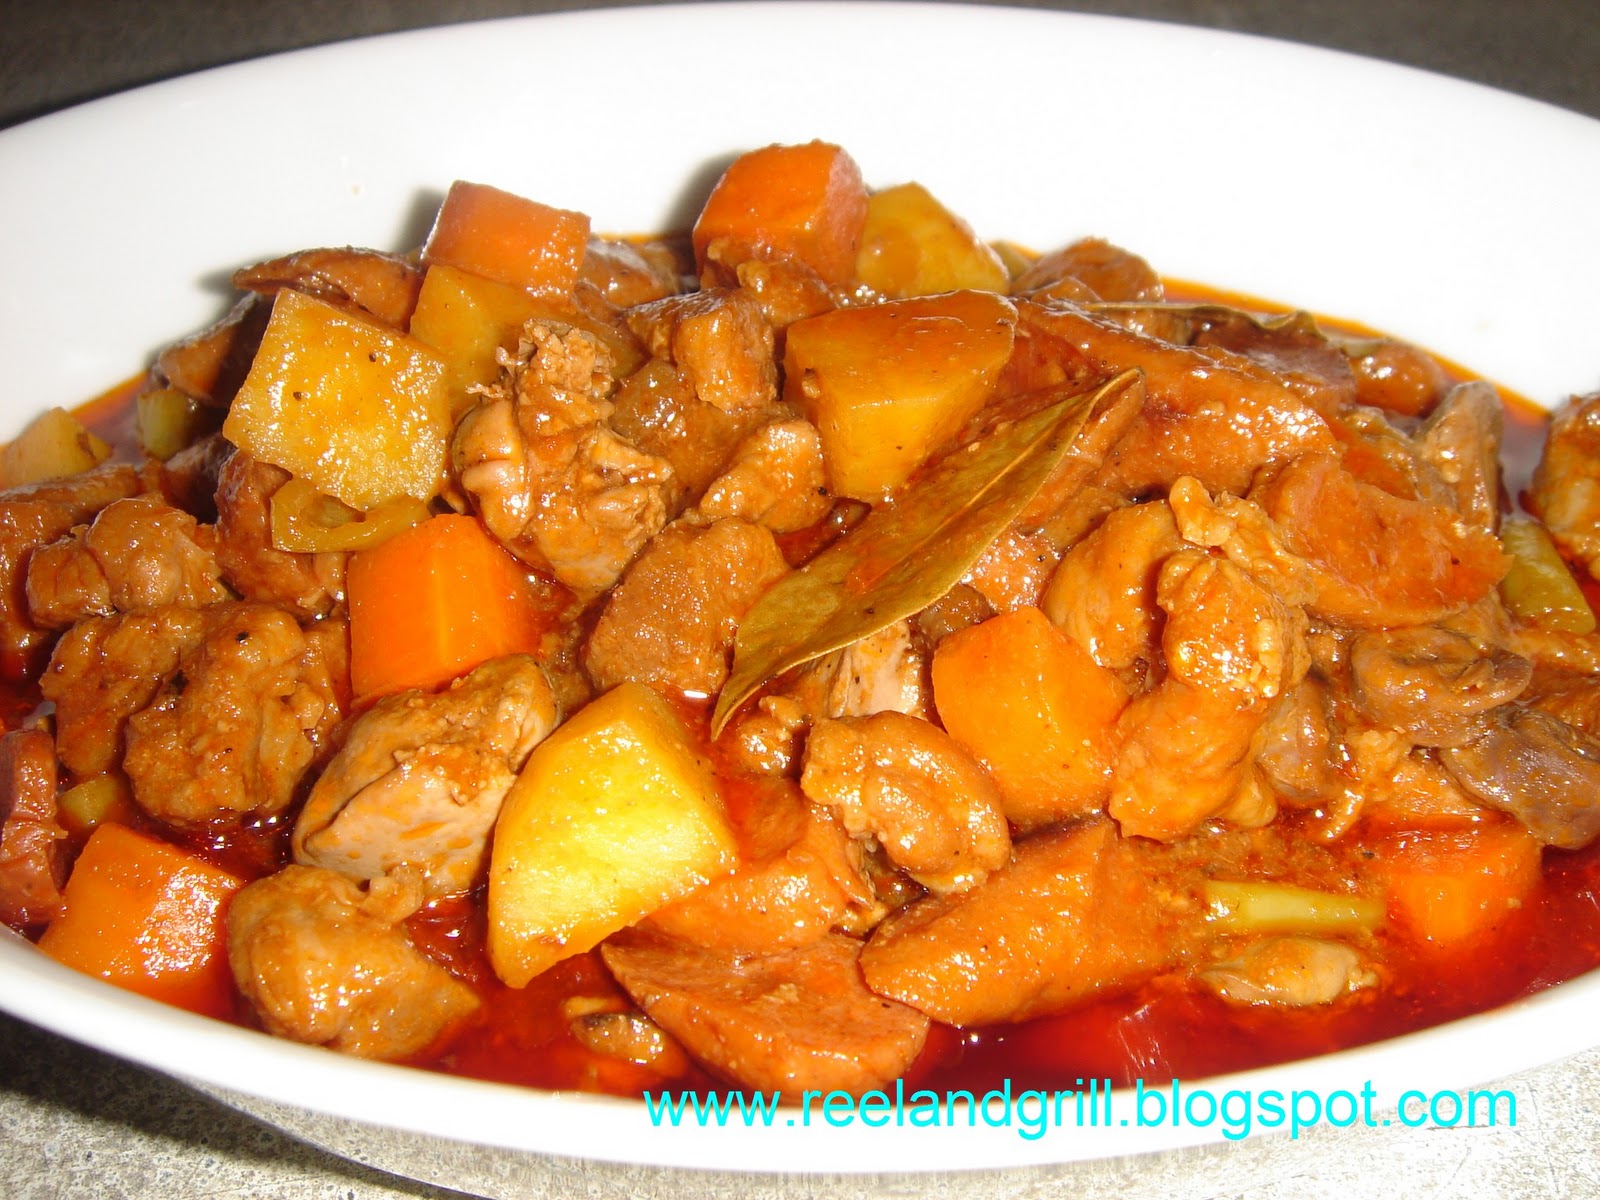 Reel and Grill: Filipino Menudo Recipe (Pork & Liver Stewed with Potato and Carrot)